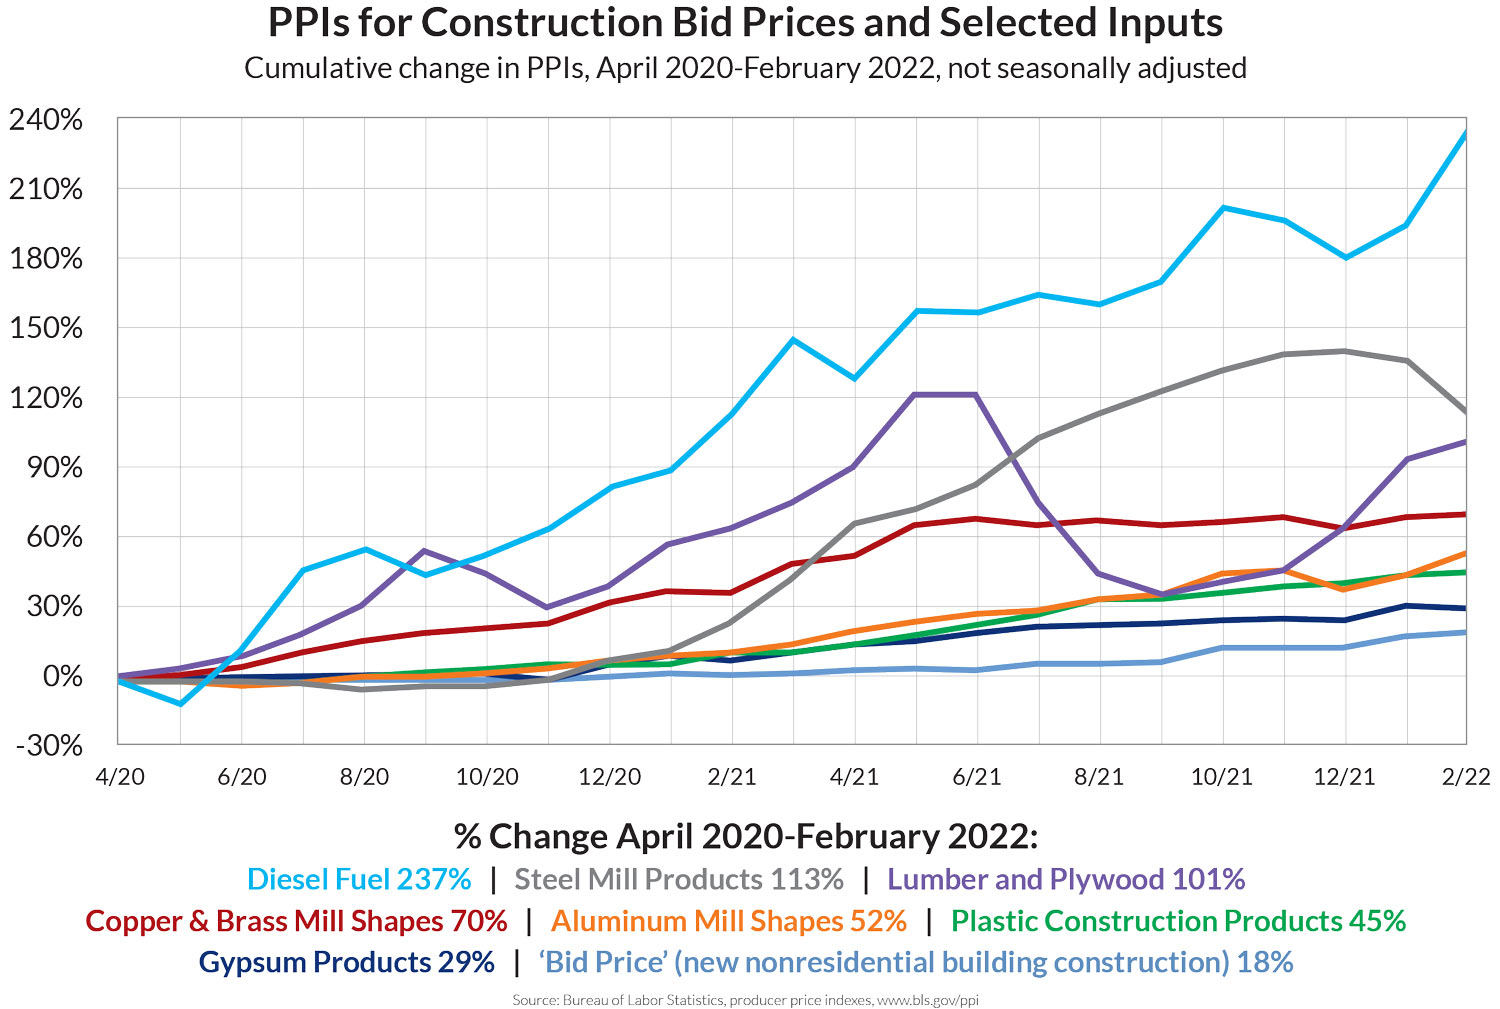 PPIs for Construction Bid Prices and Selected Inputs